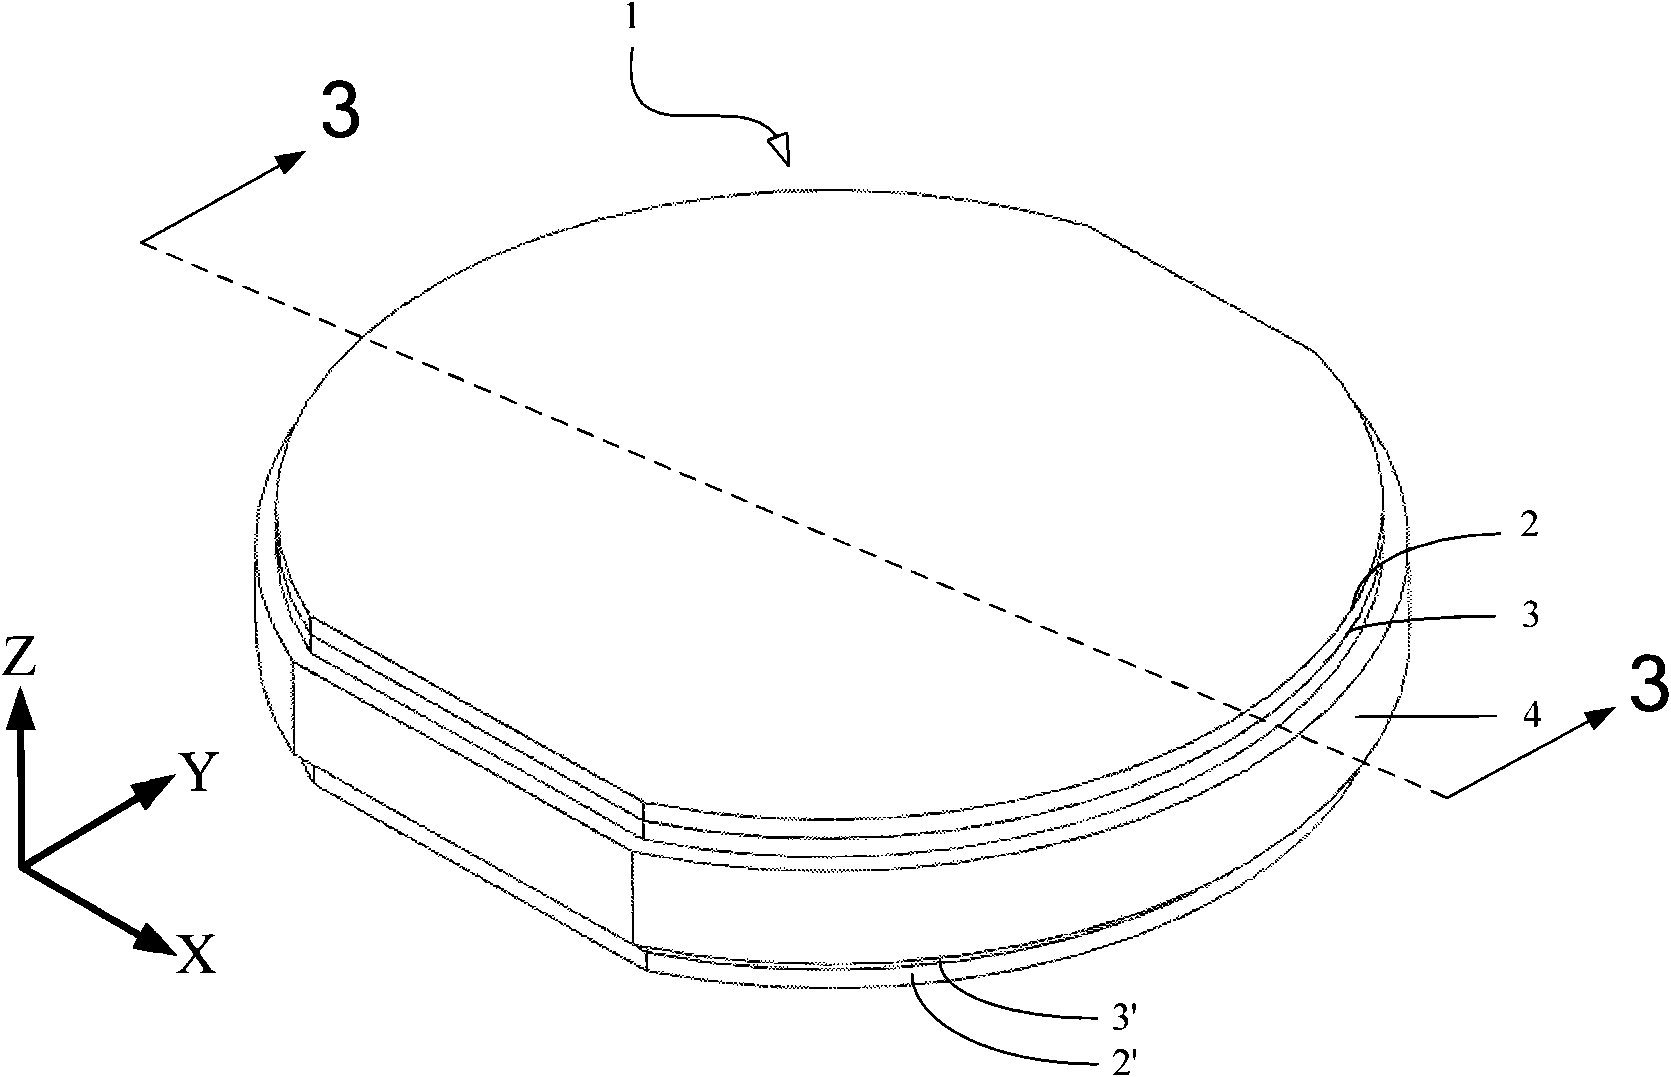 Micro machine differential capacitance accelerometer with symmetrical structure